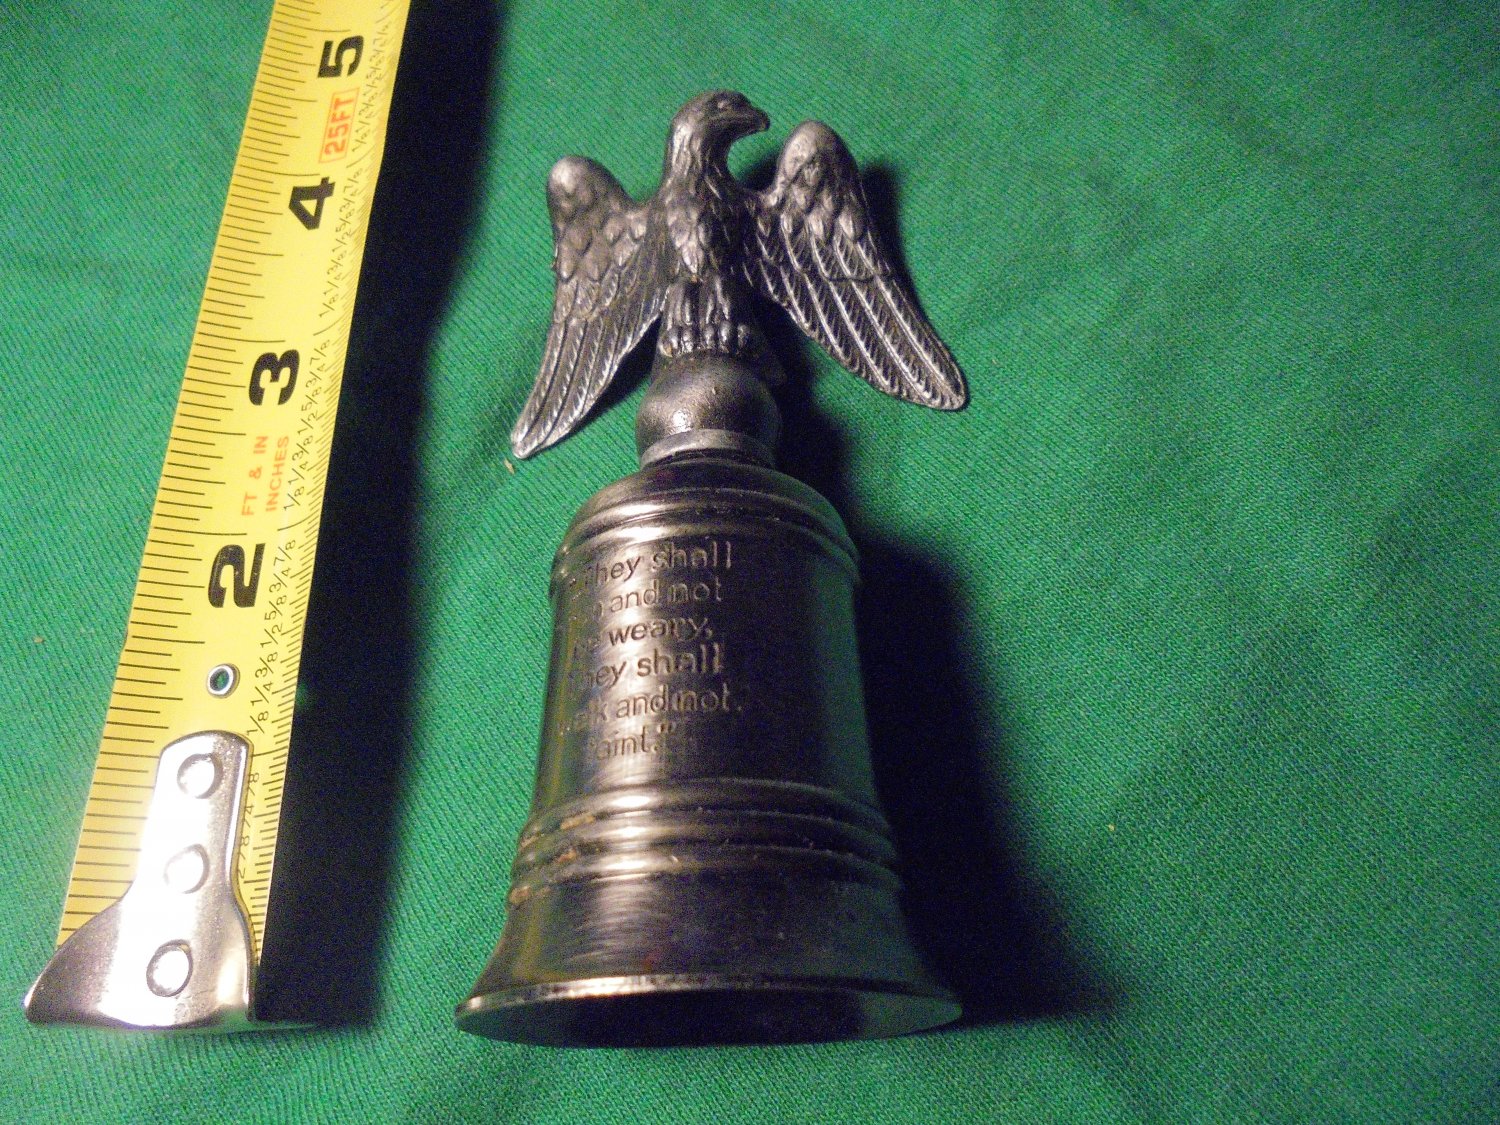 1990 5" Metal Bell - Eagle with Wings on Top Says Isaiah 40:31! $15.00 obo!